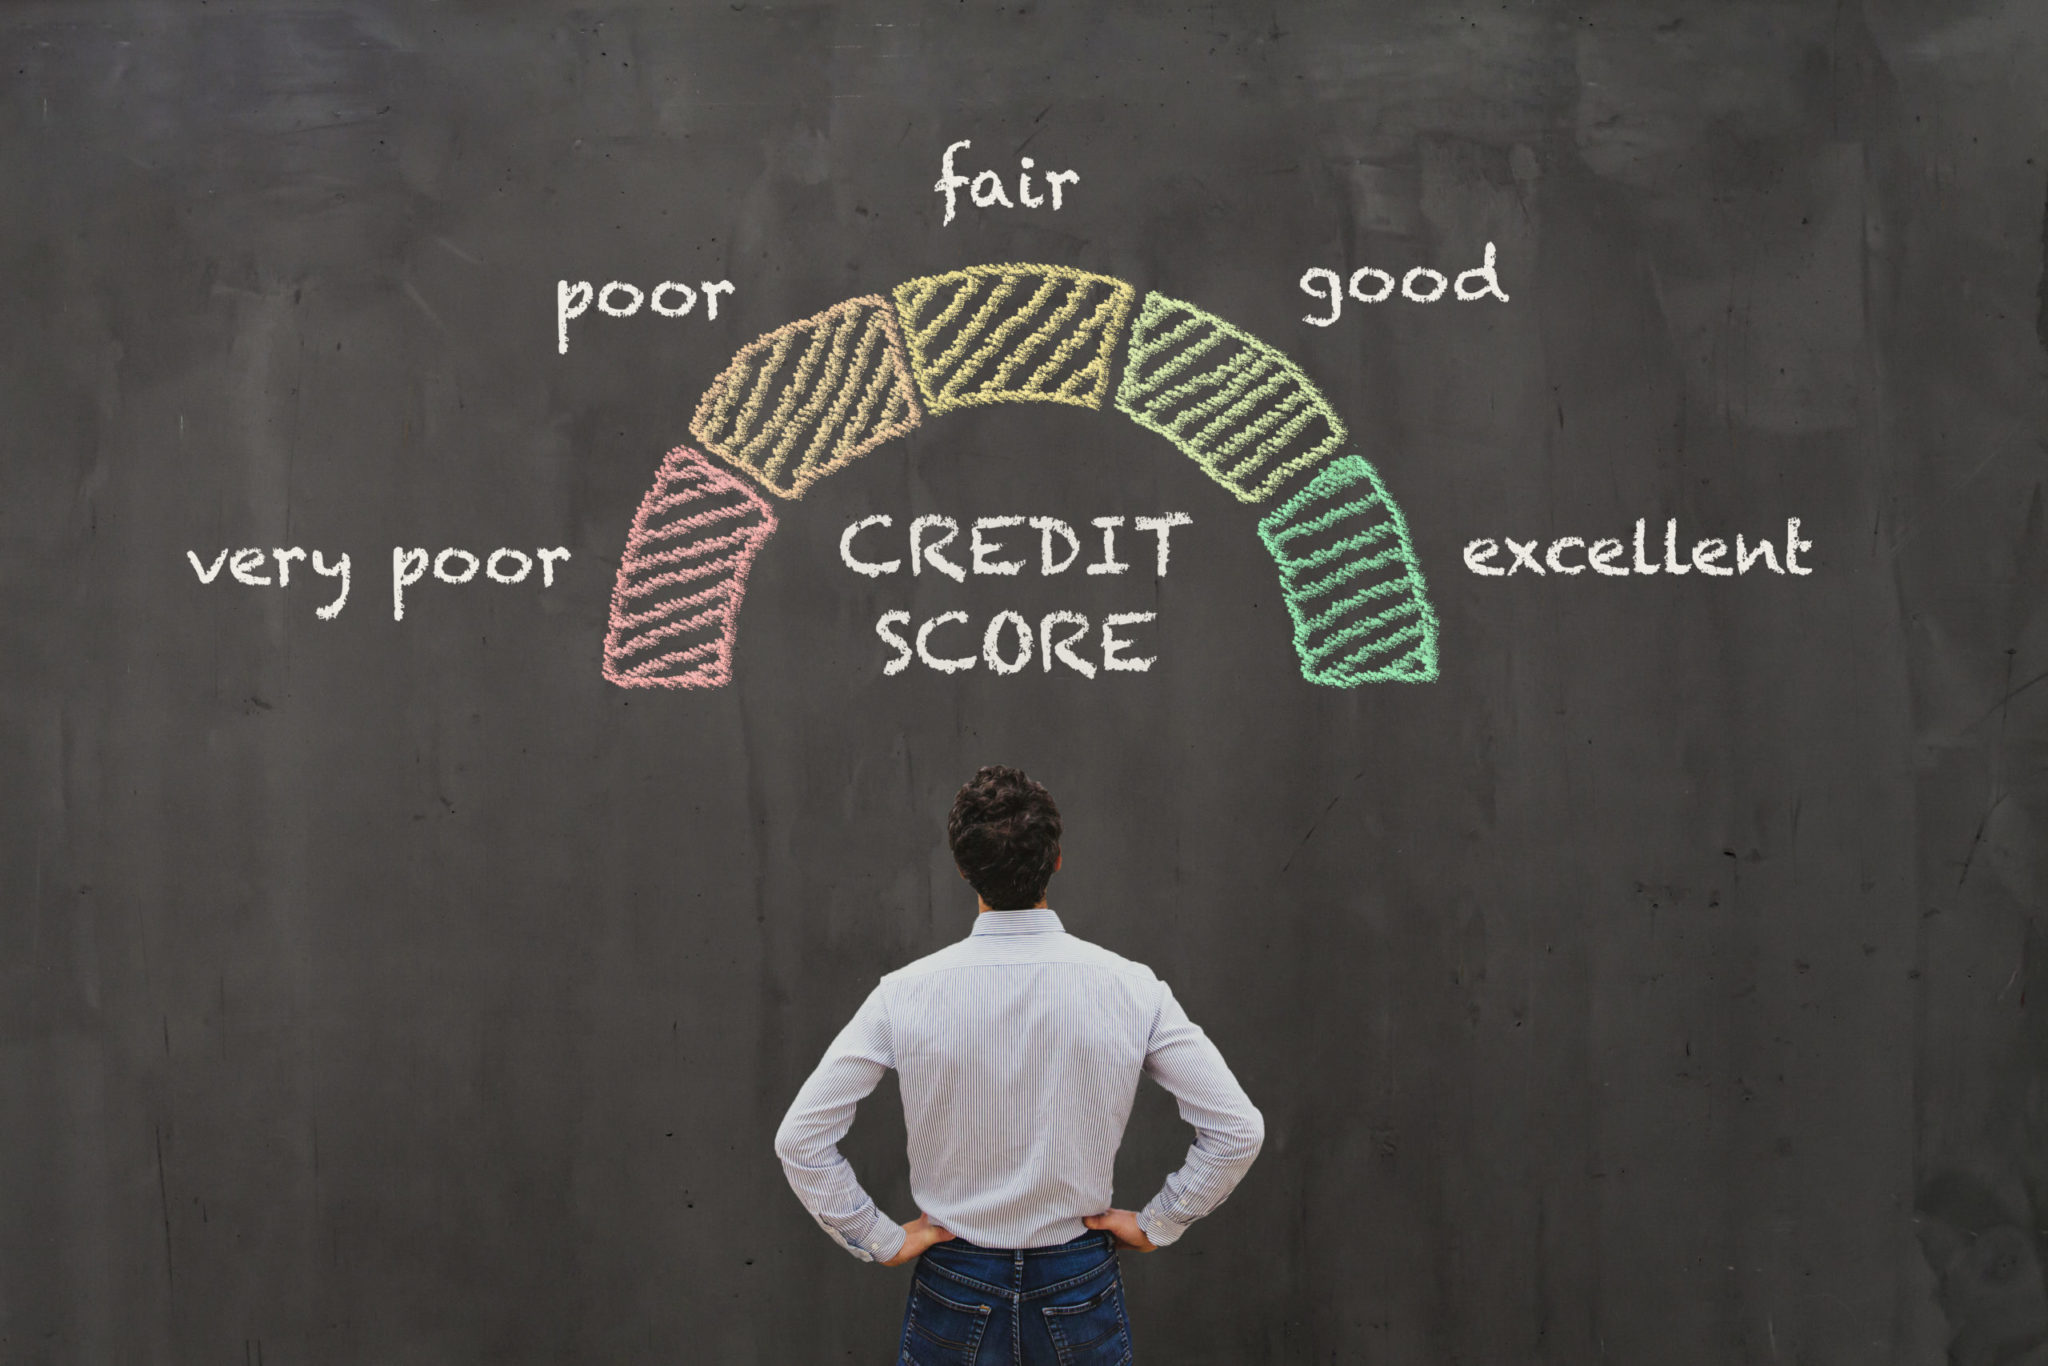 man standing in front of credit score chalk drawing